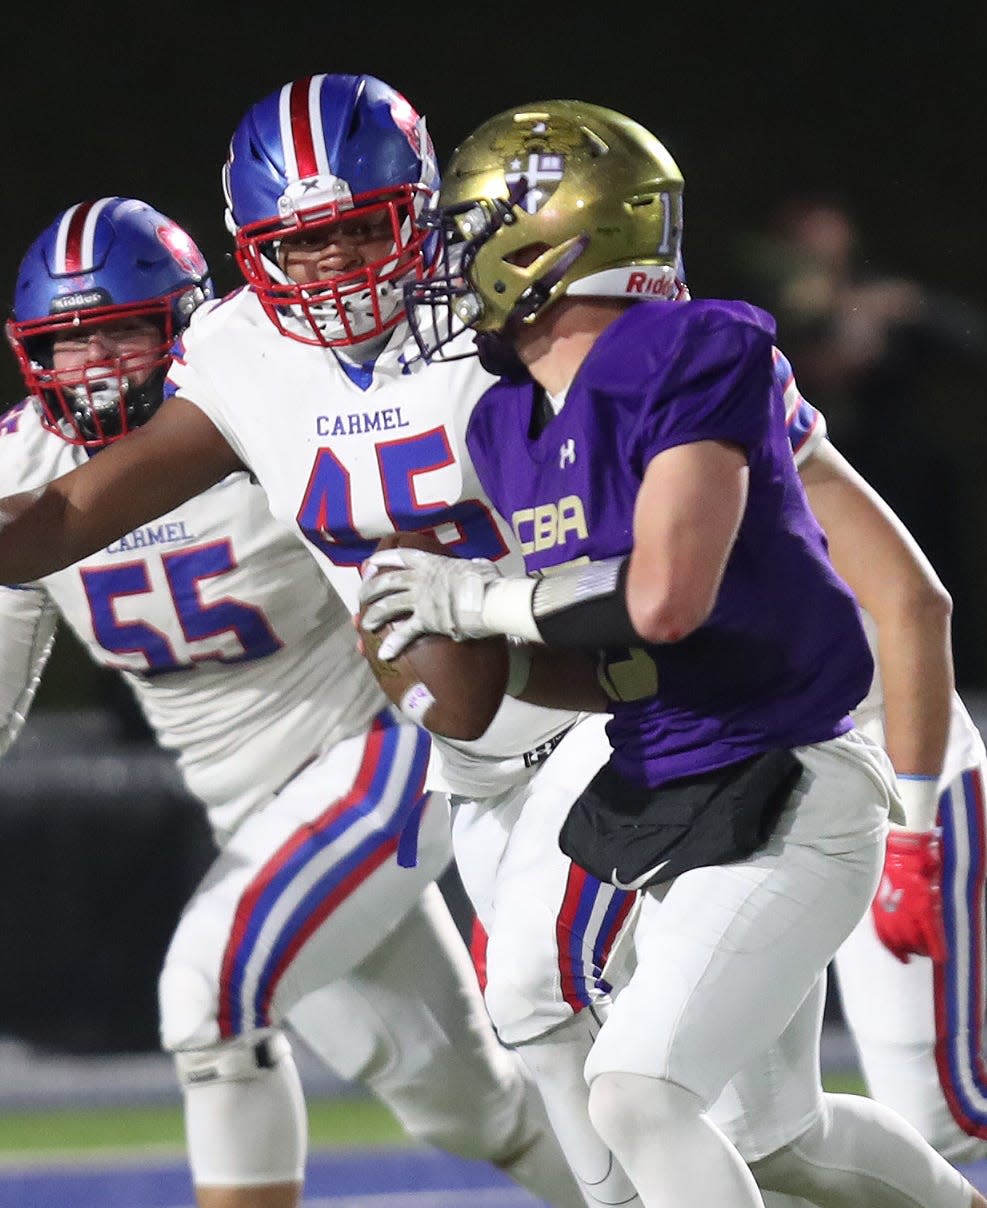 Carmel's Jayden Robles (55) and King Mercer (45) put pressure on Christian Brothers Academy quarterback Jake Iacobaccio (15) during the Class AA state semifinal playoff game at Middletown High School Nov. 25, 2023.